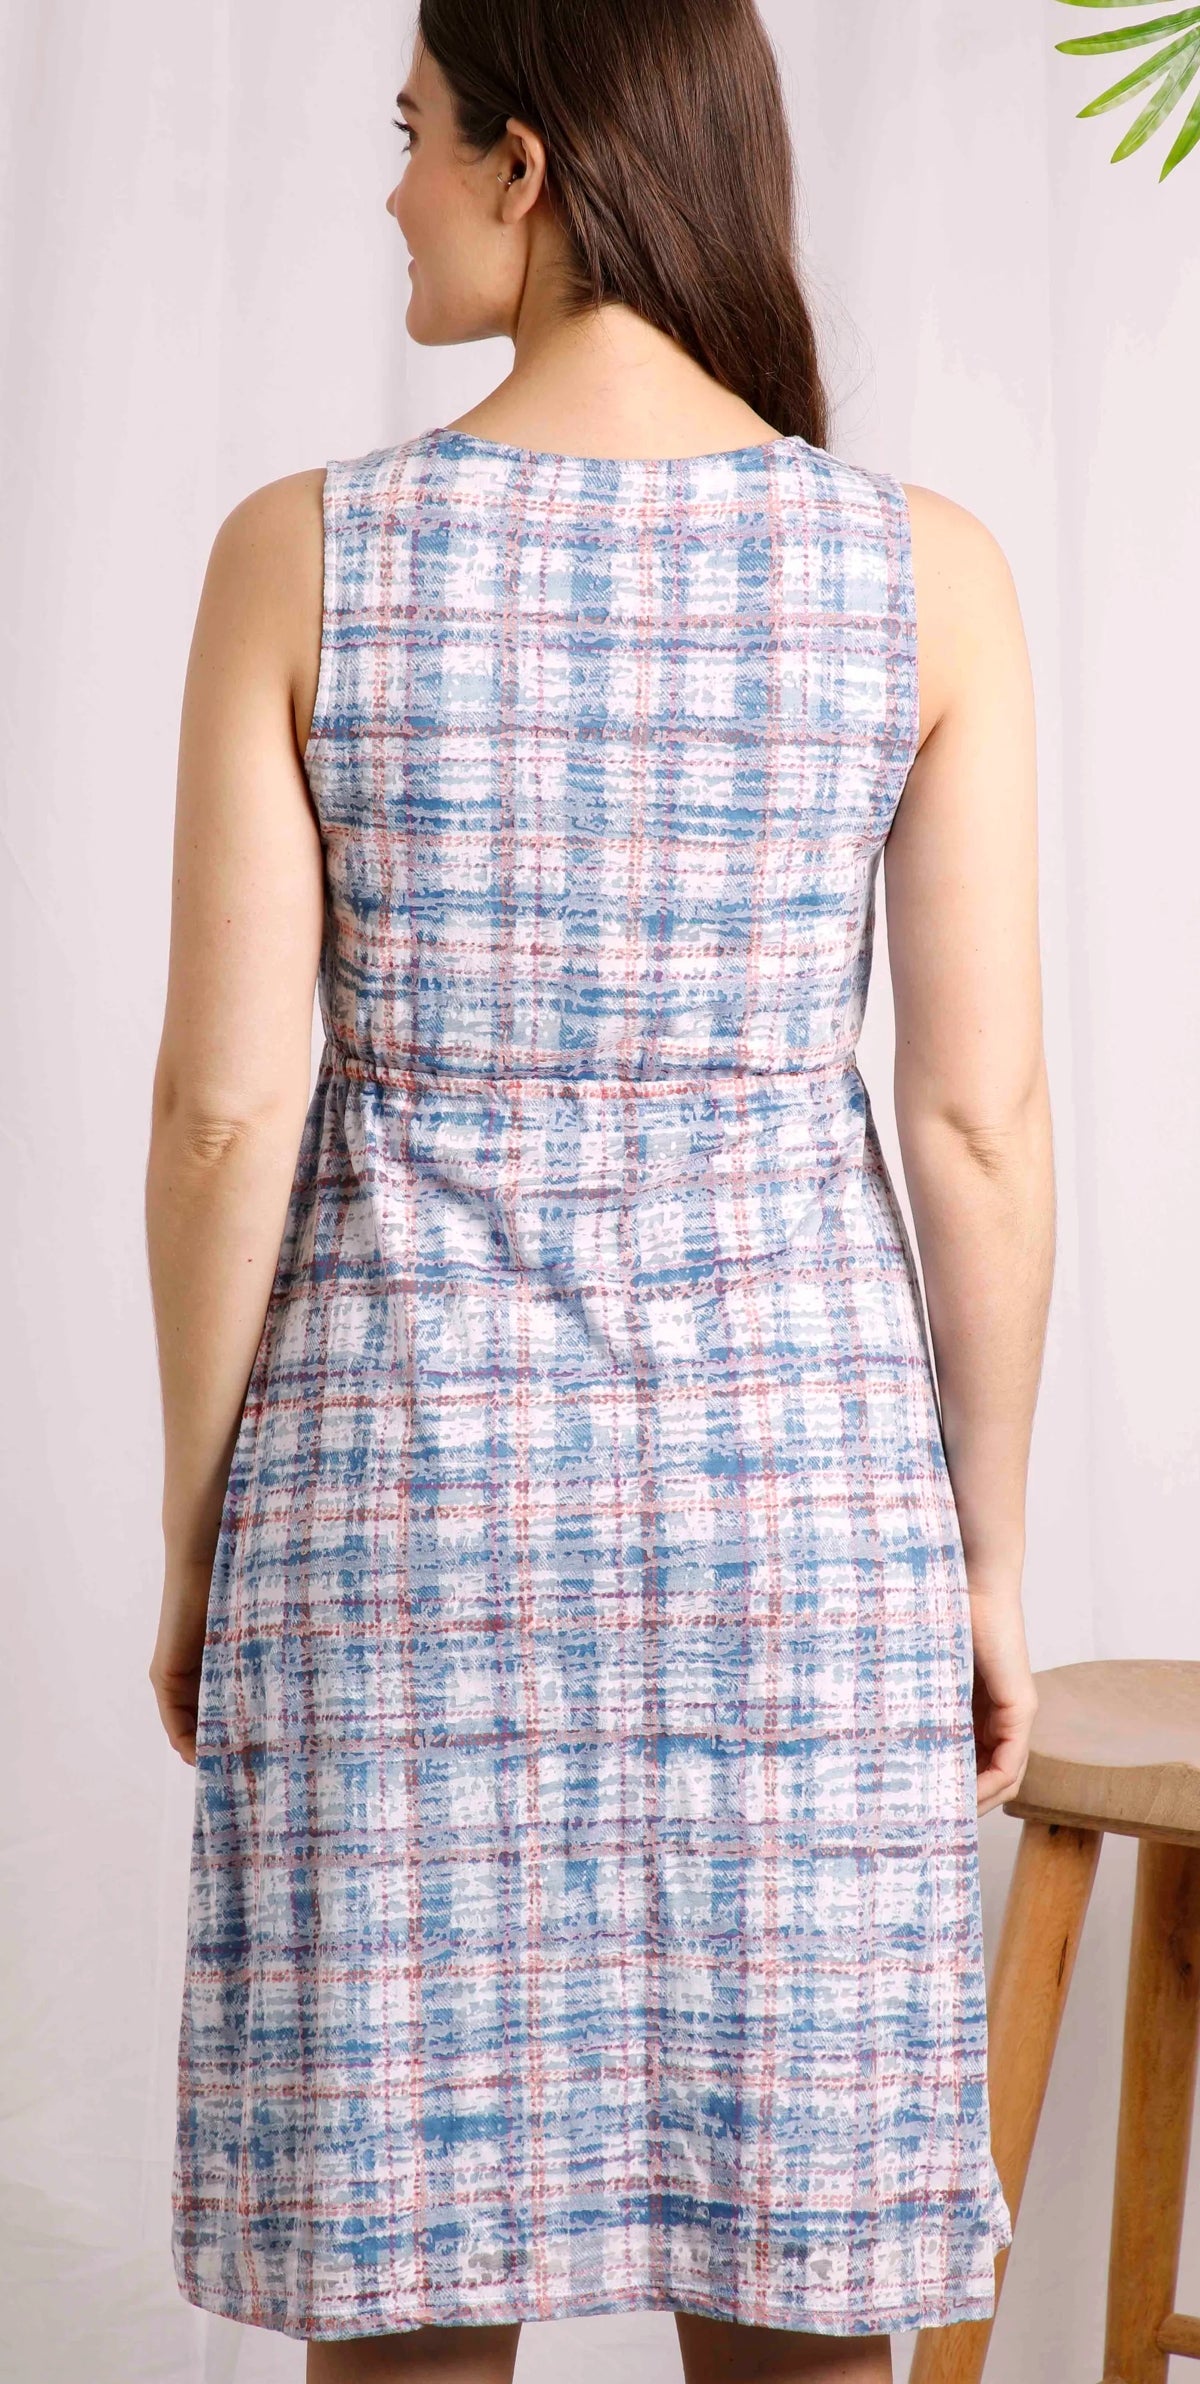 Women's Teresia burnout dress from Weird Fish in a Pale Denim Blue check pattern.